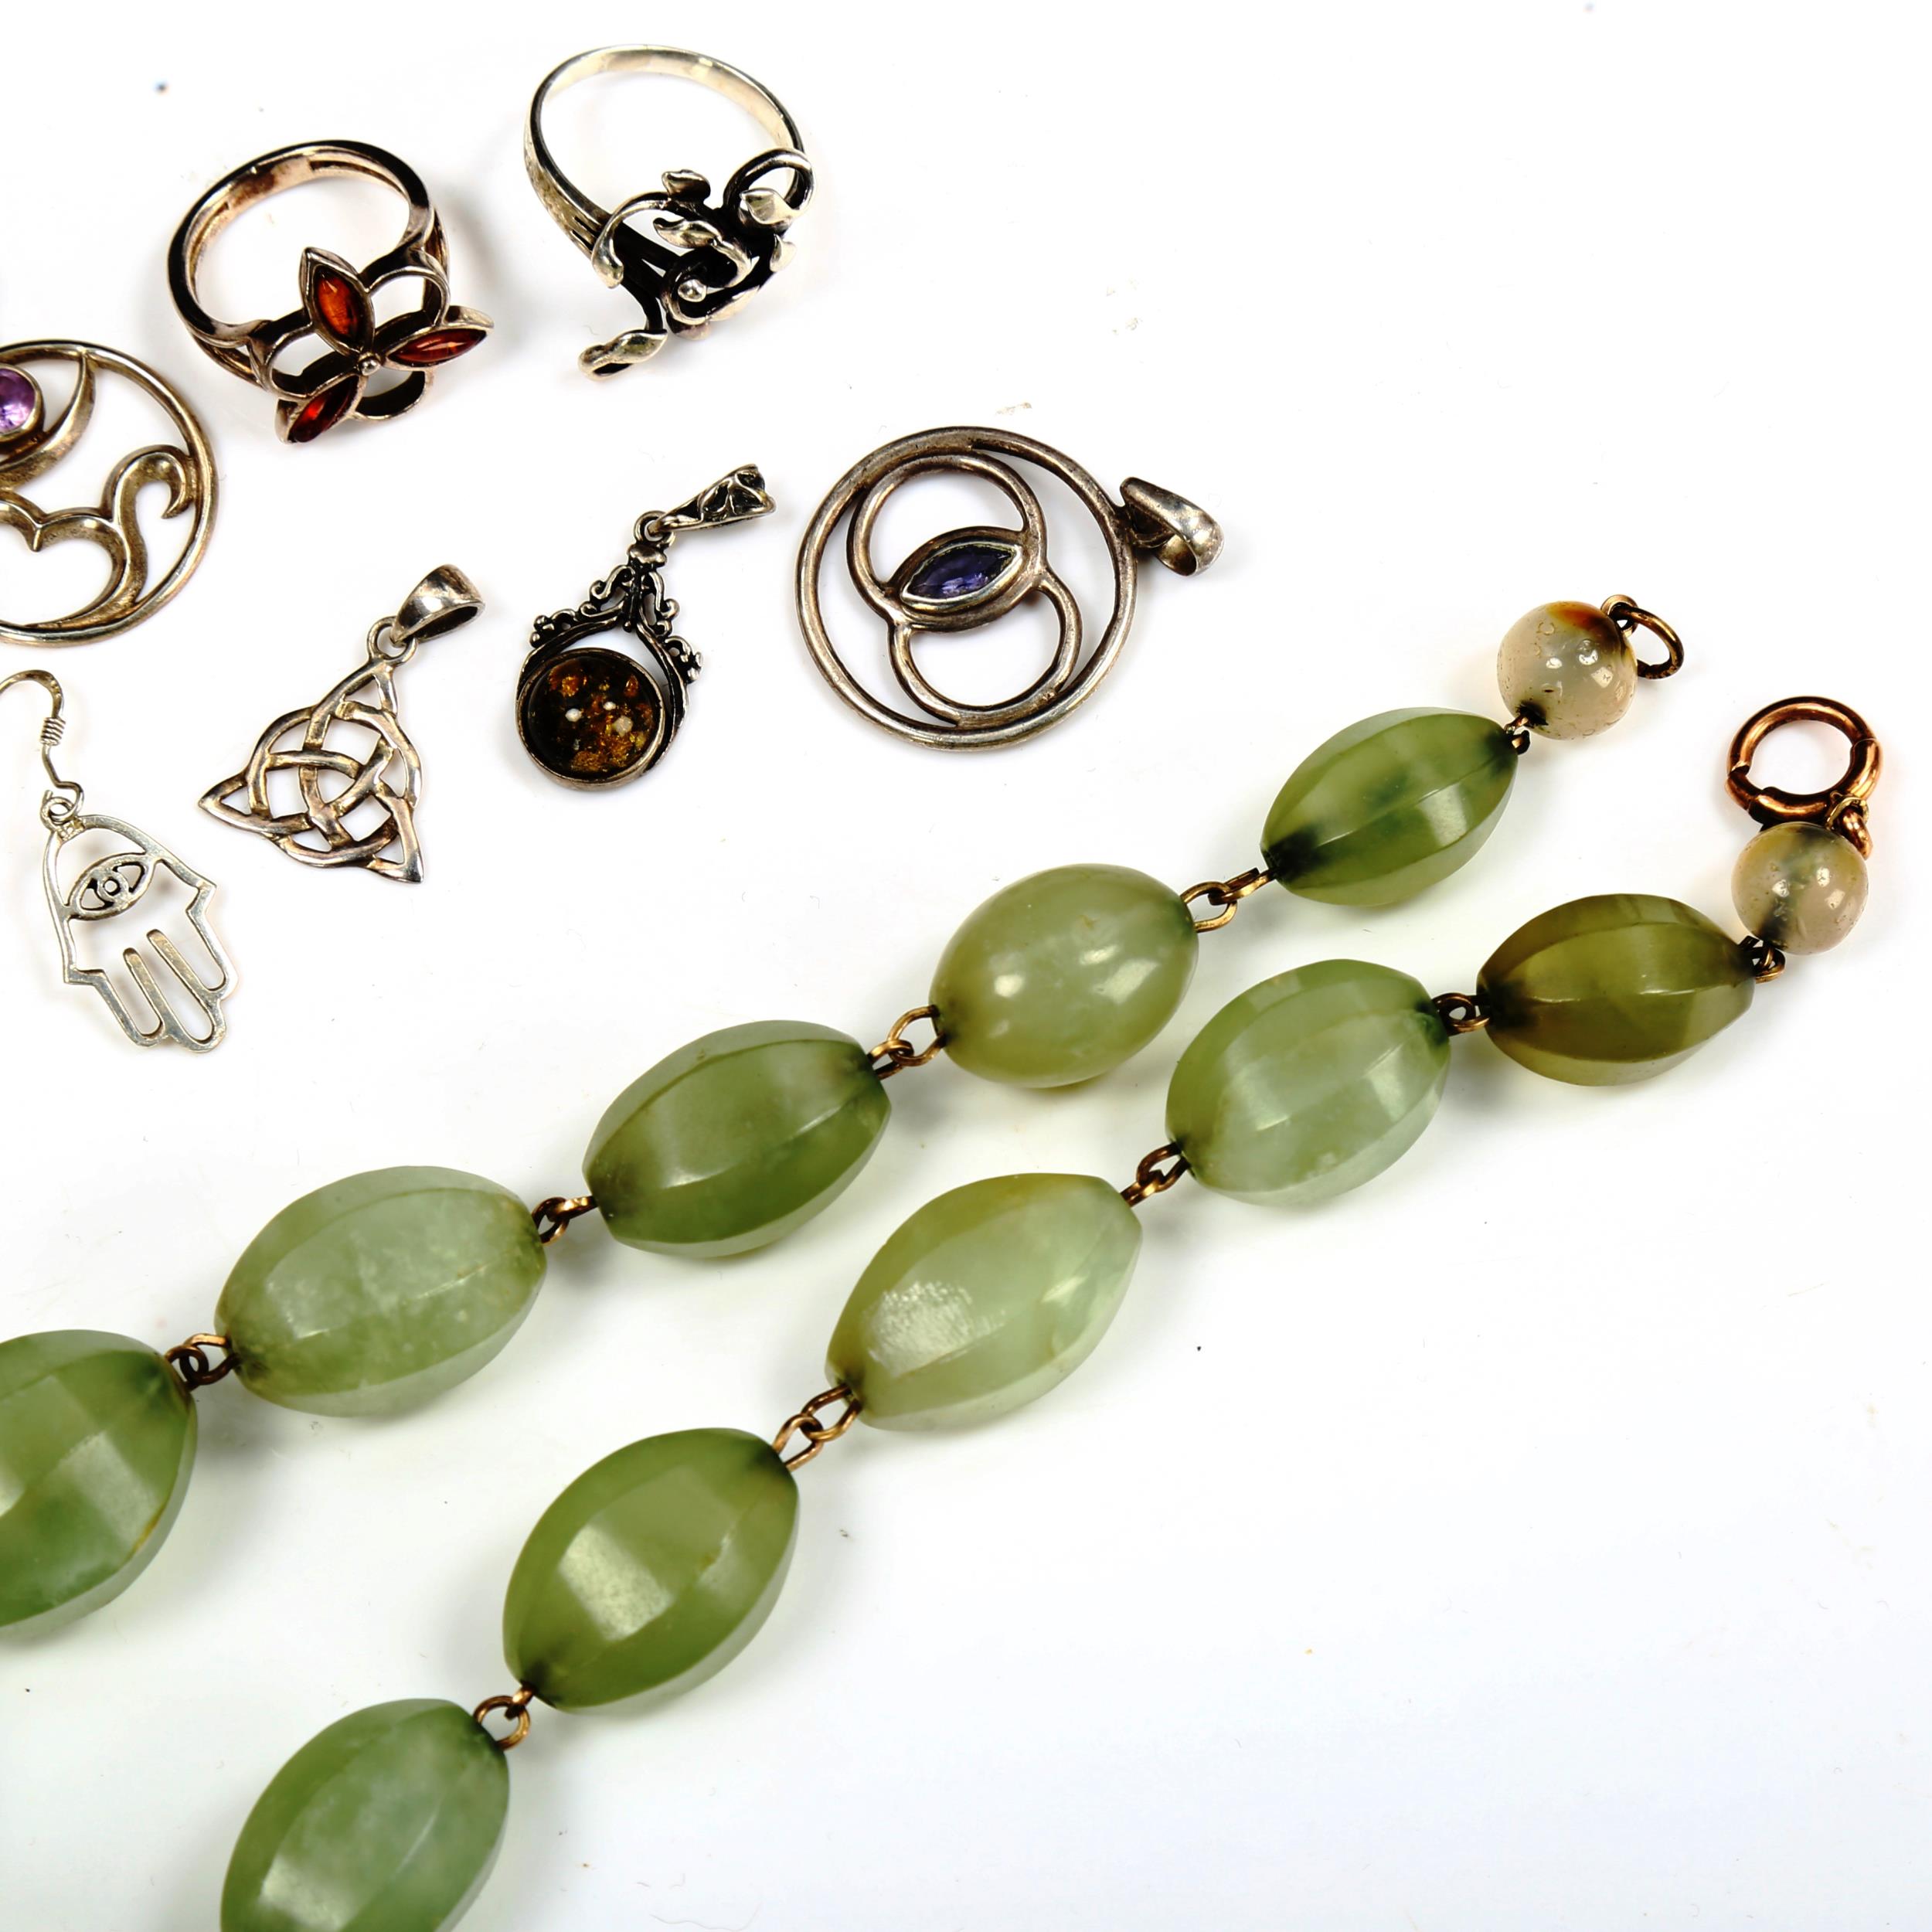 Various silver jewellery and a green hardstone necklace Lot sold as seen unless specific item(s) - Image 3 of 4